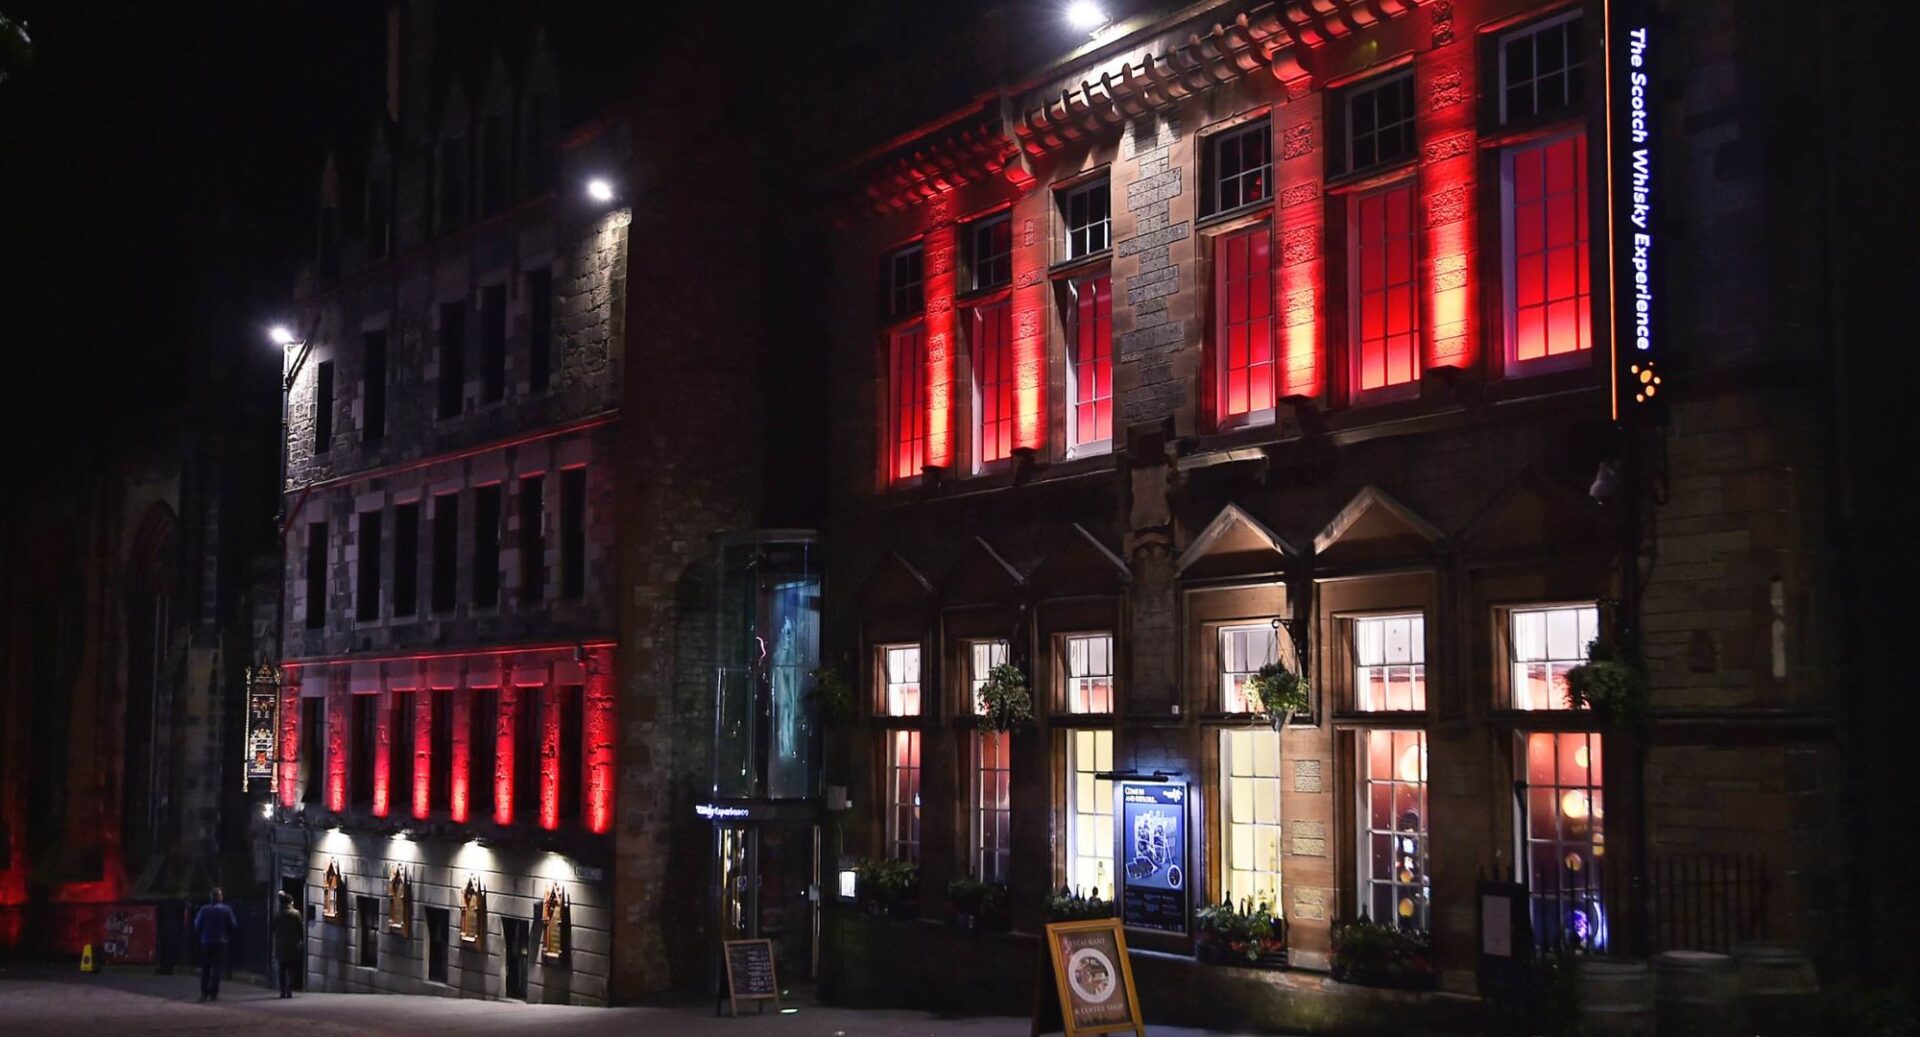 The Scotch Whisky Experience exterior lit up in red for Chinese New Year